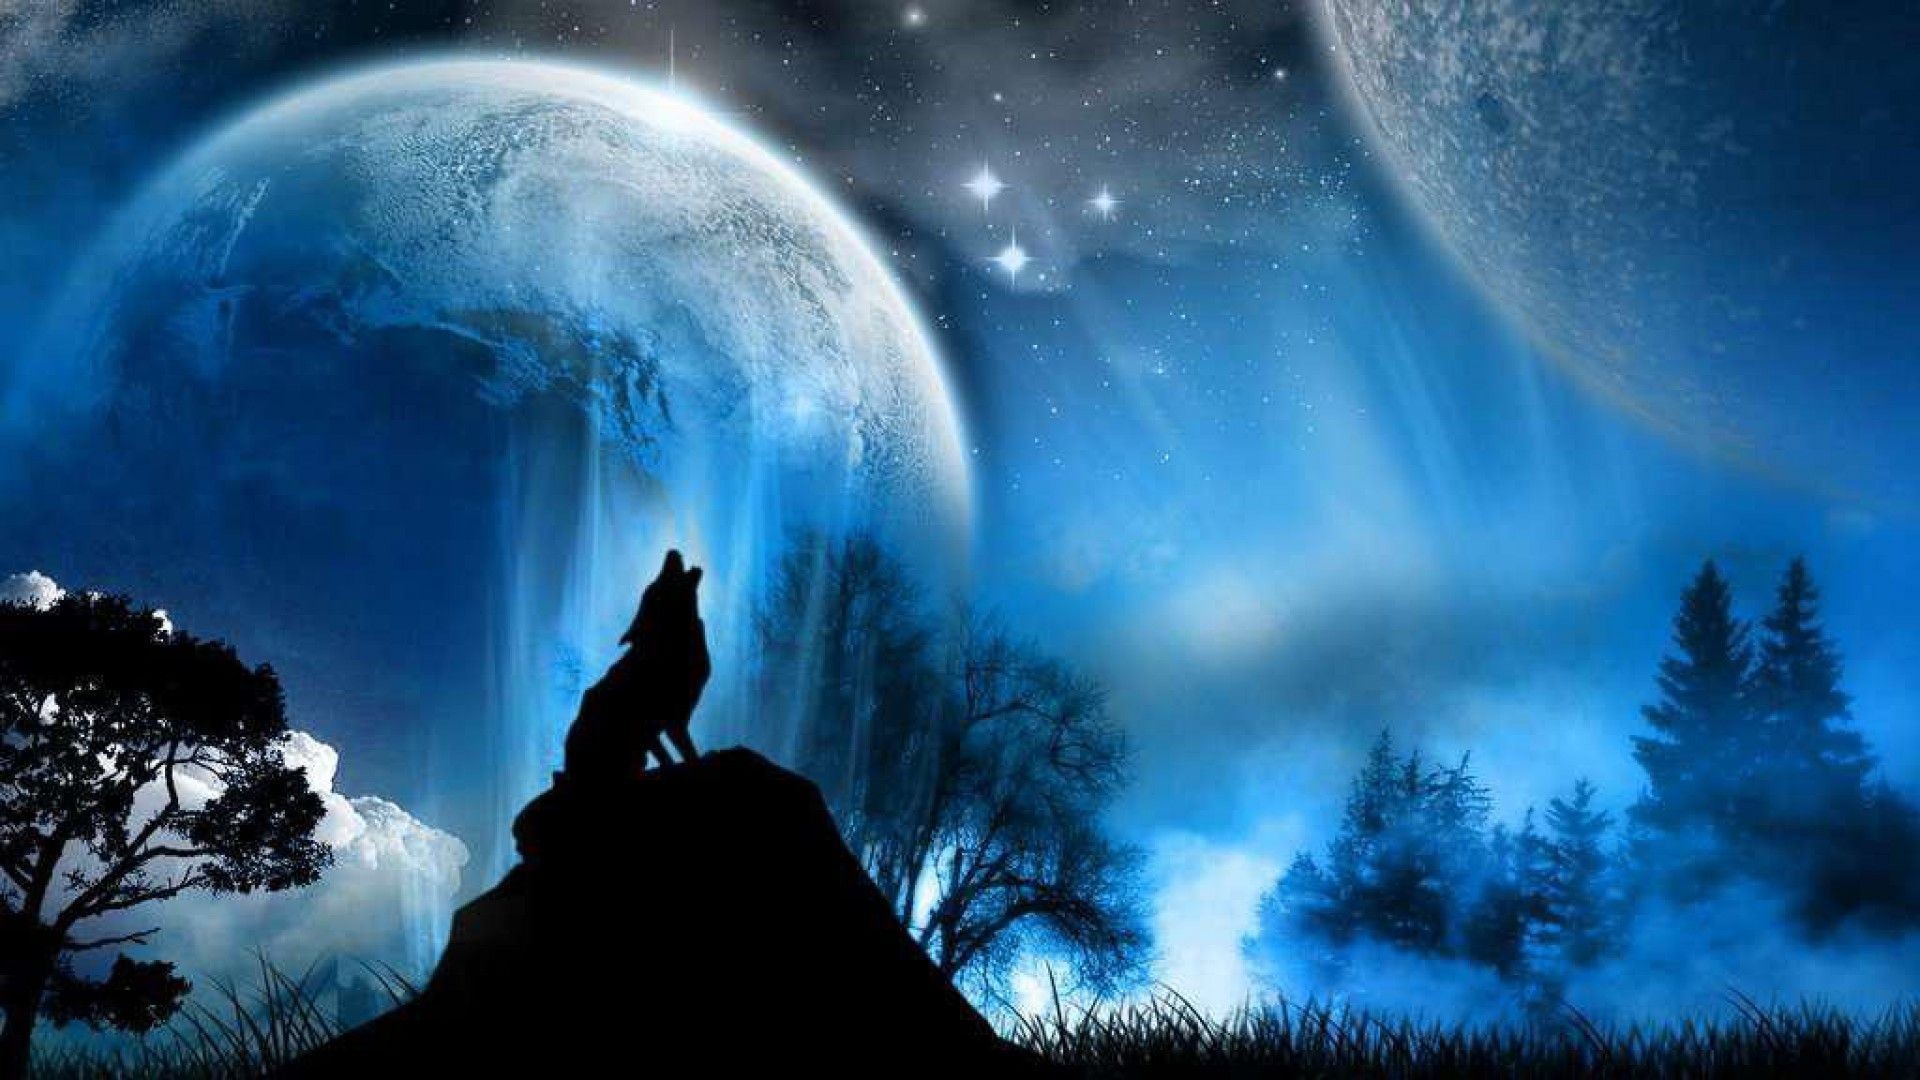 1920x1080 Only the best free epic wolf wallpapers you can find online! Epic wolf  wallpapers and background images for desktop, iPhone, Android and any  screen ...